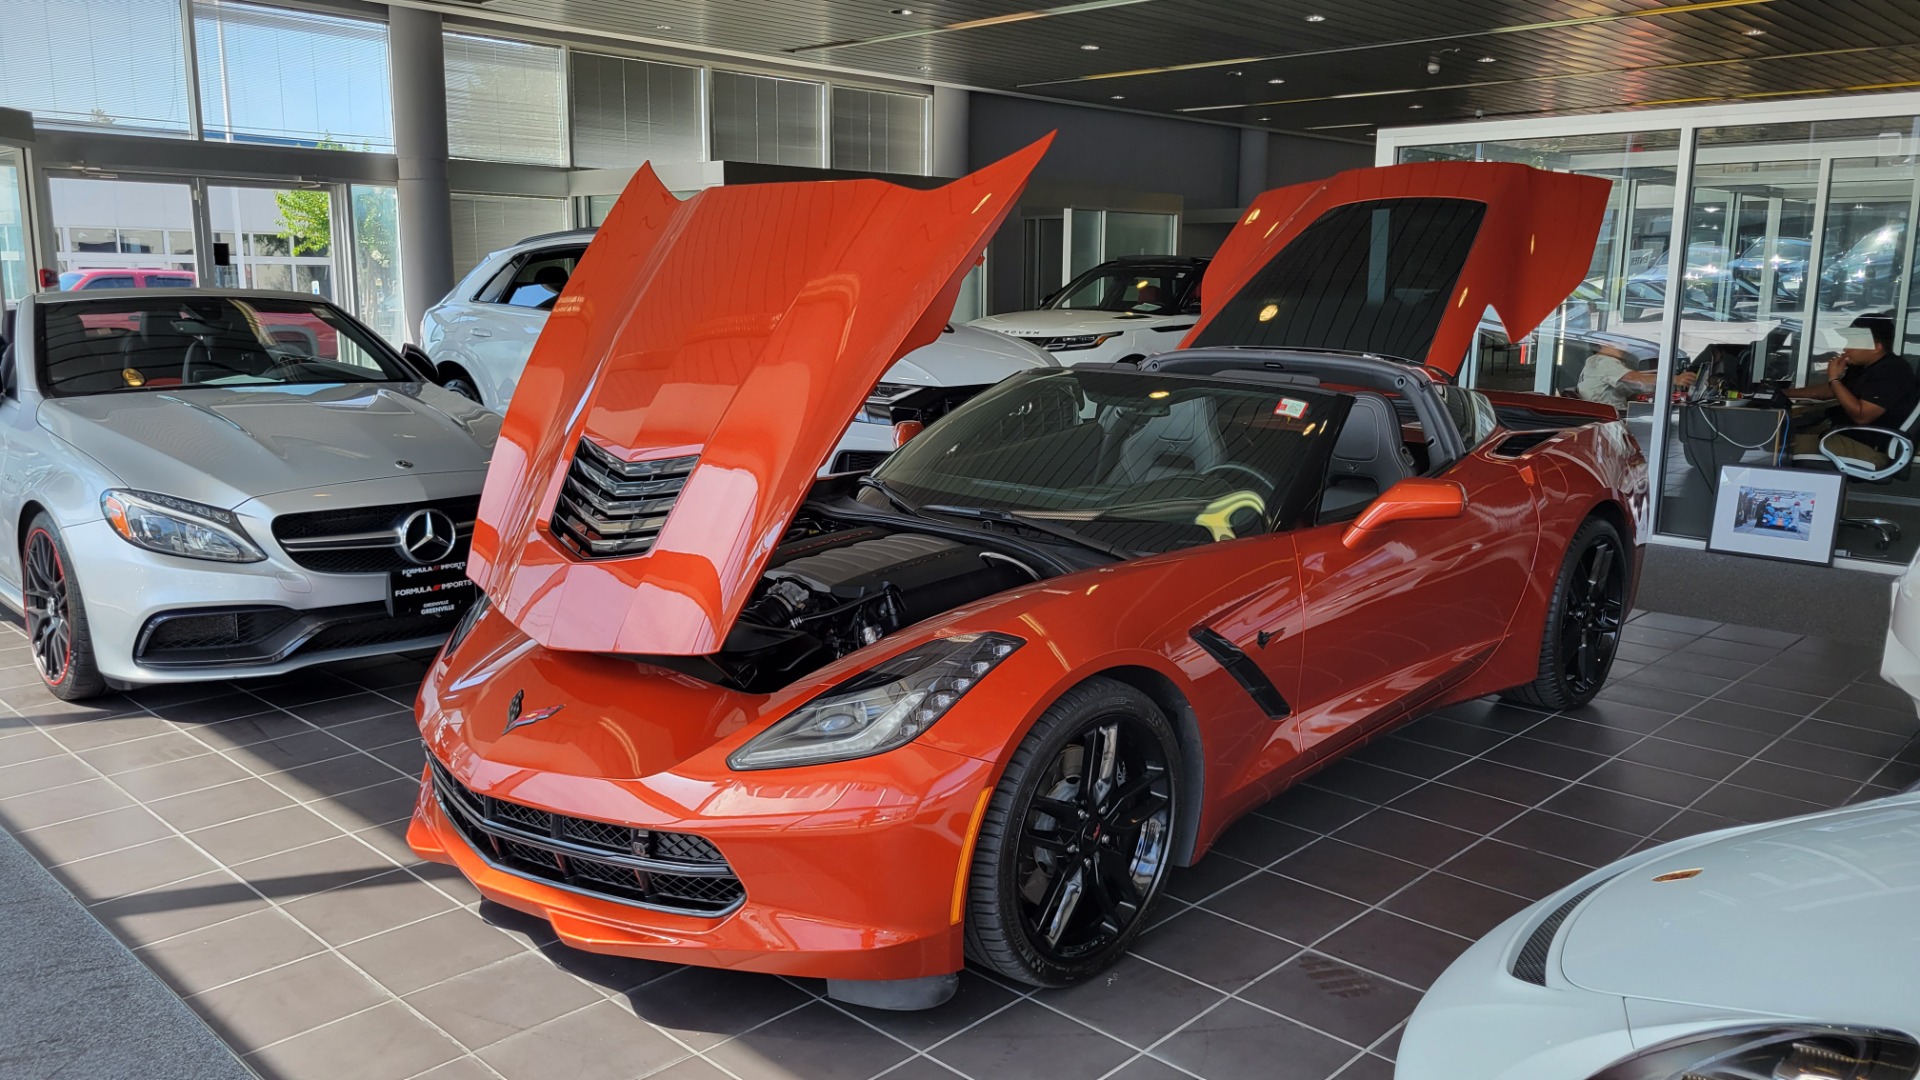 Used 2016 Chevrolet CORVETTE C7 COUPE / Z51 / 2LT / NAV / AUTO / PERF DATA & VIDEO RECORDER for sale $56,495 at Formula Imports in Charlotte NC 28227 10